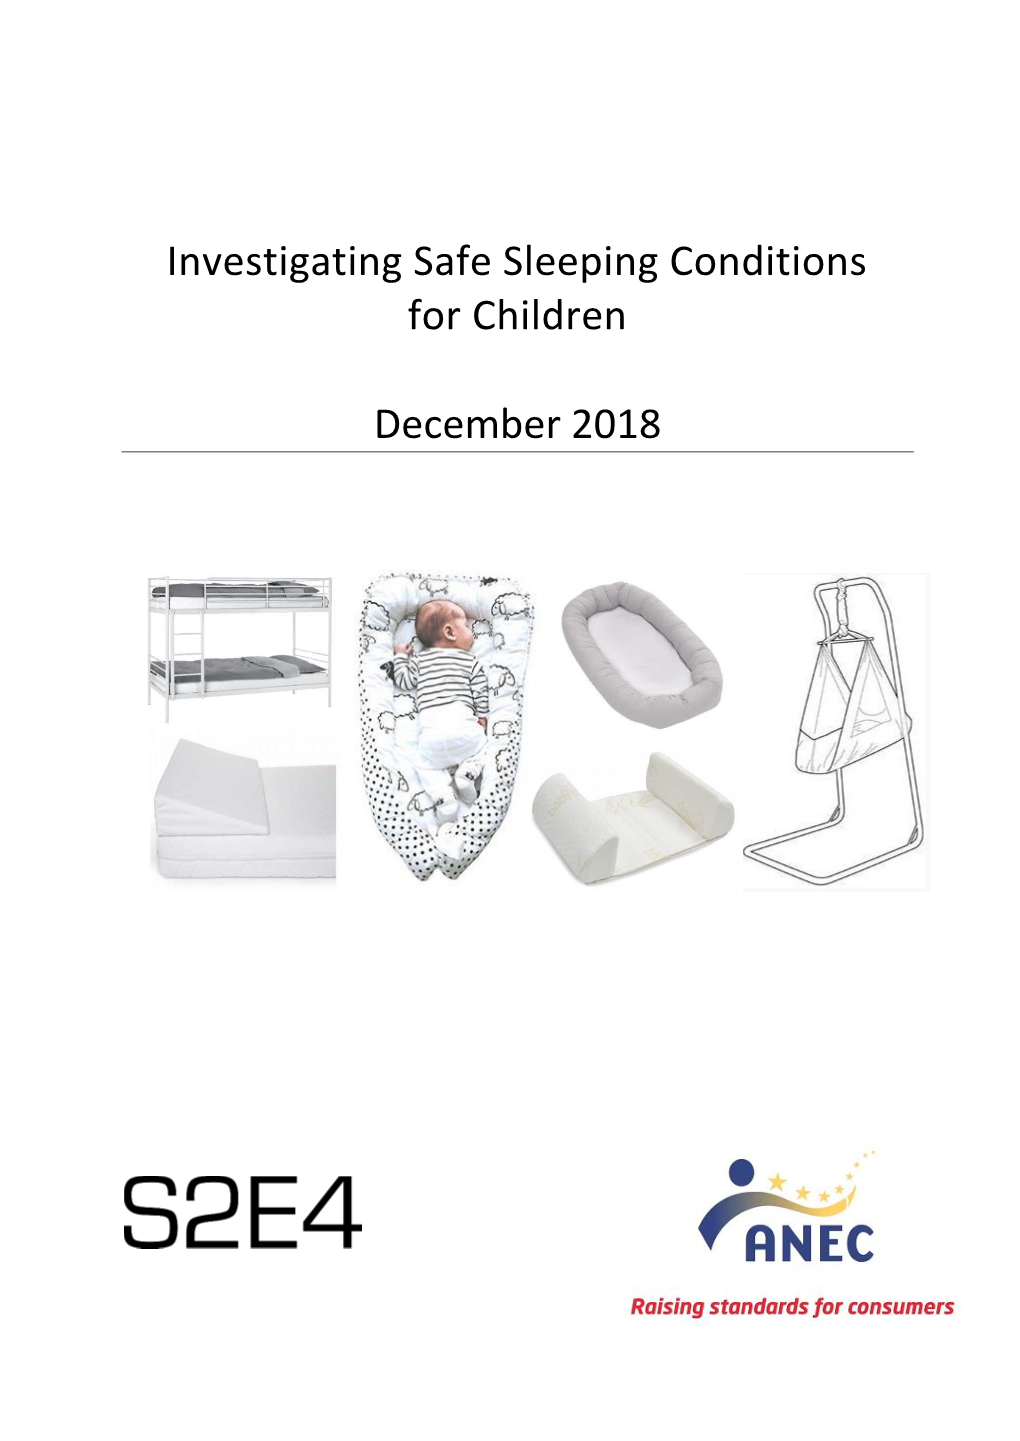 Investigating Safe Sleeping Conditions for Children December 2018